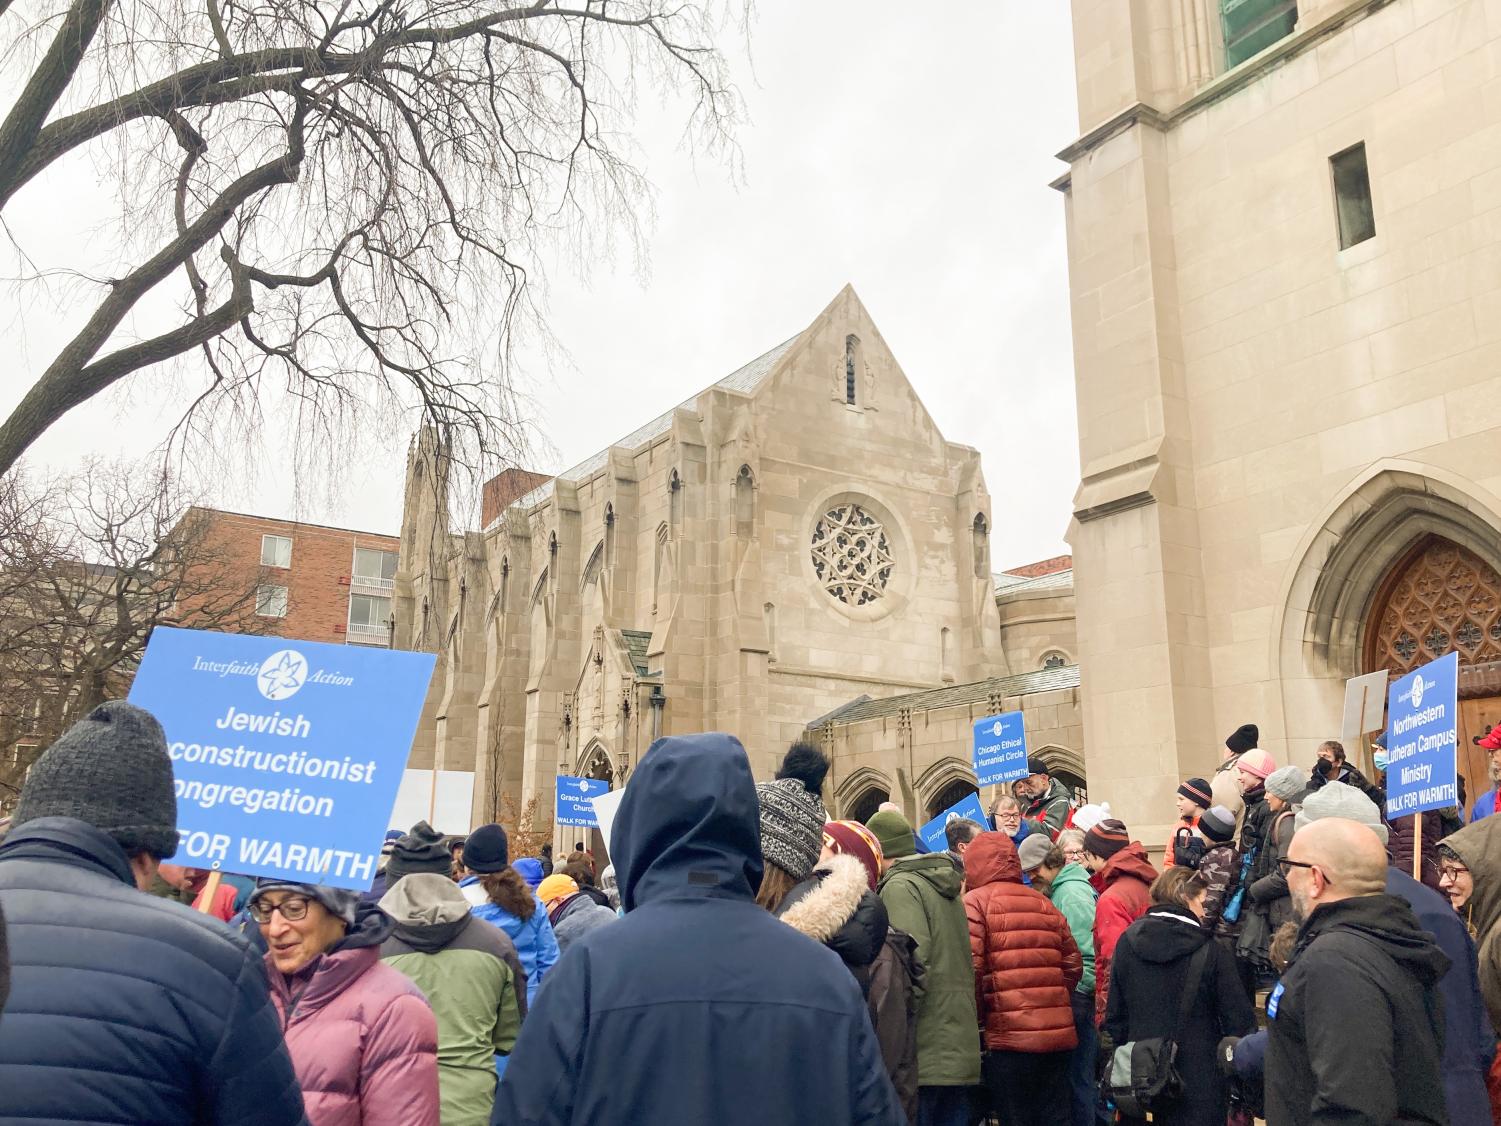 A+group+of+people+holding+blue+signs+for+religious+organizations+gather+outside+a+church.